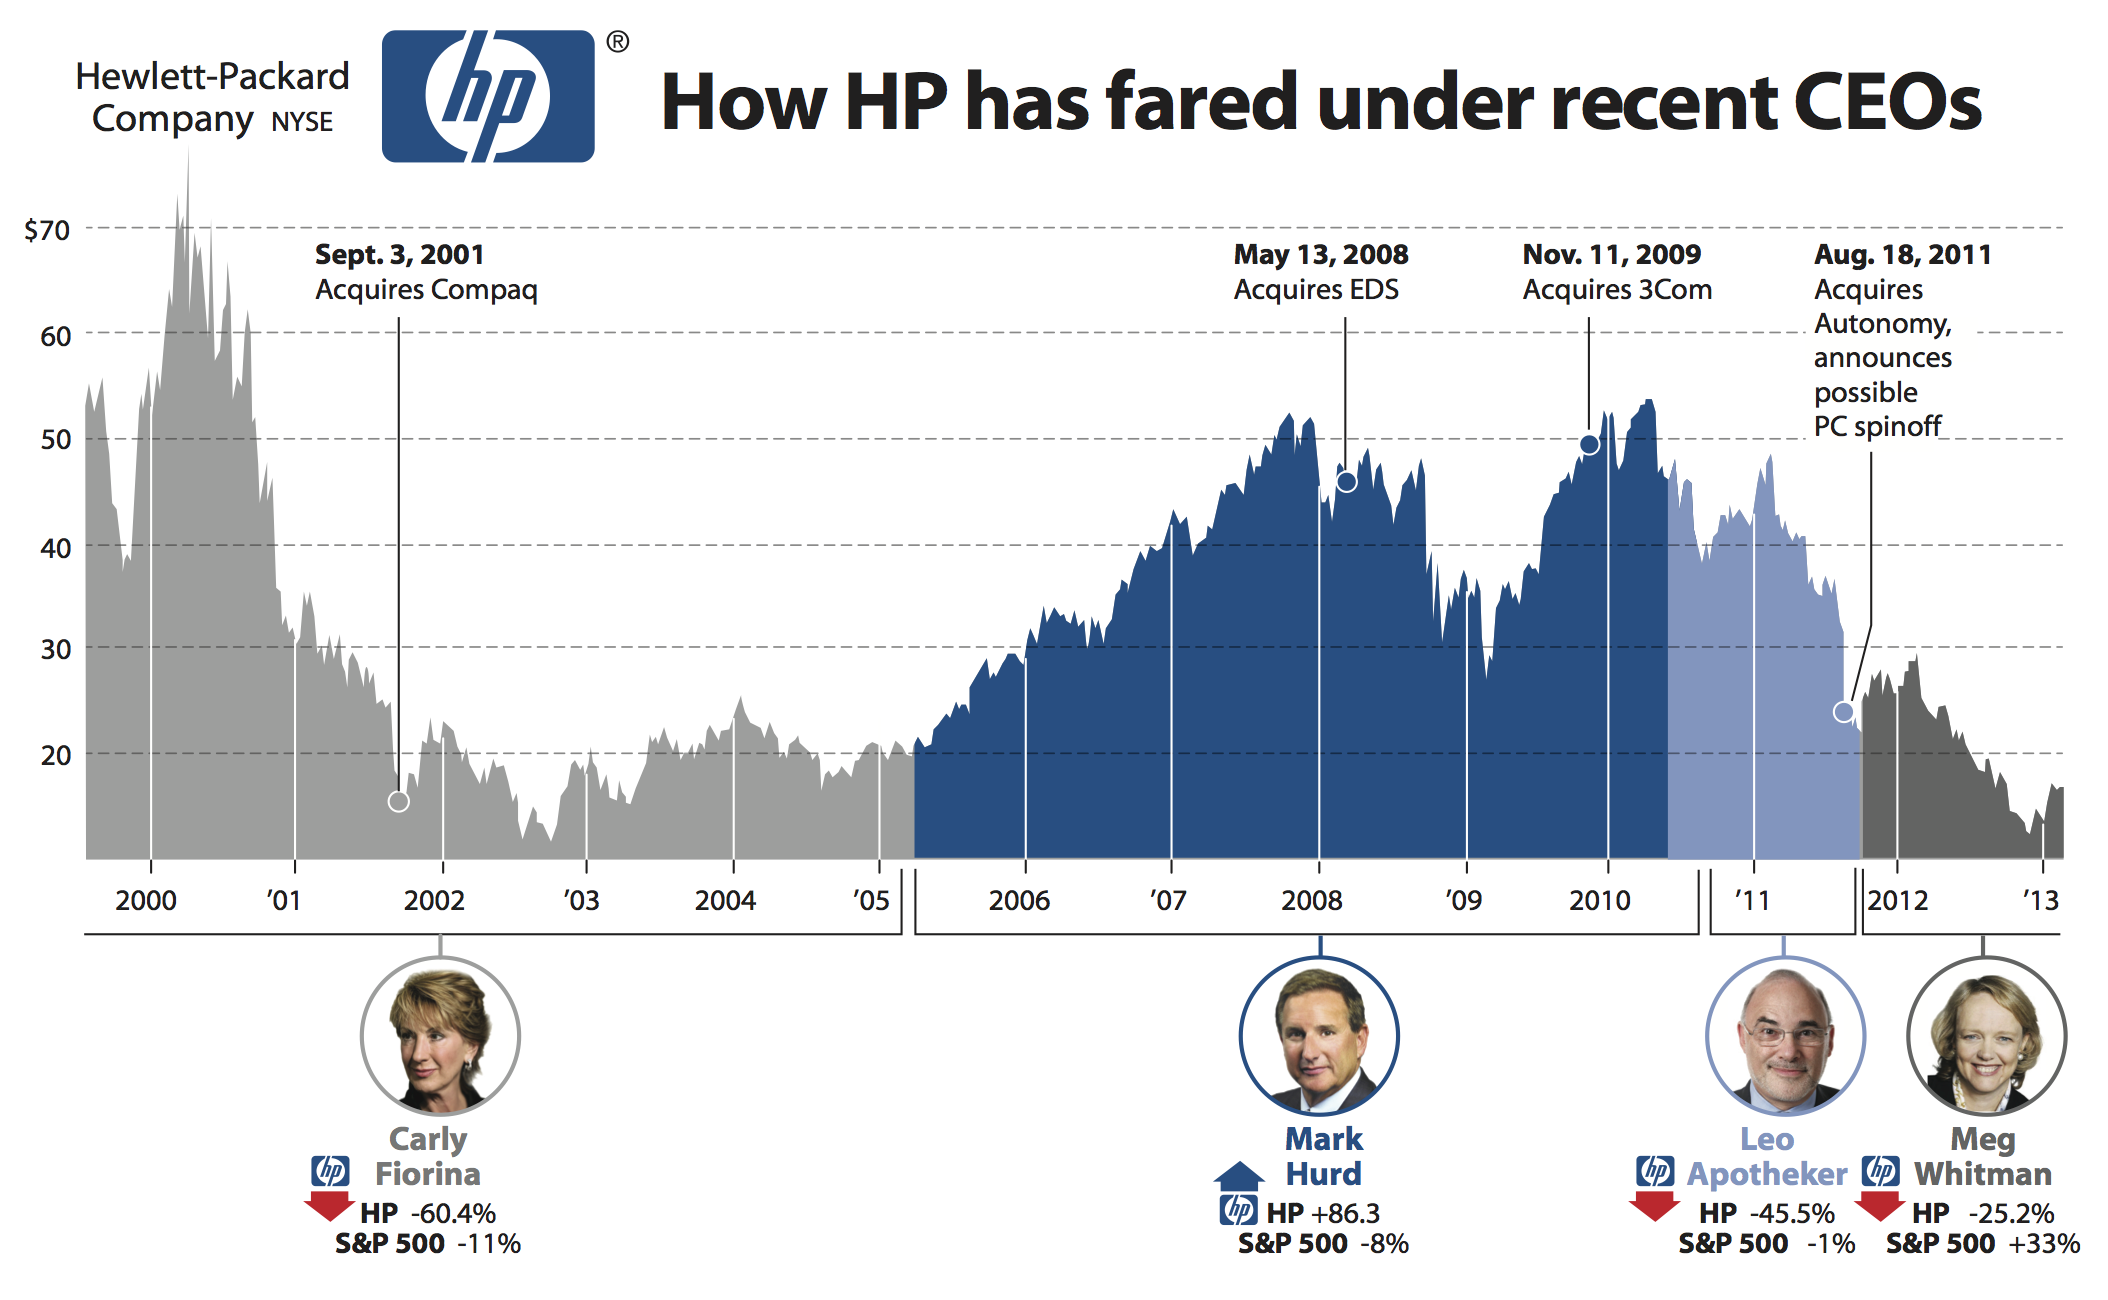 http://upload.wikimedia.org/wikipedia/commons/a/a0/HPQ_Stock_Price_Since_2000.png